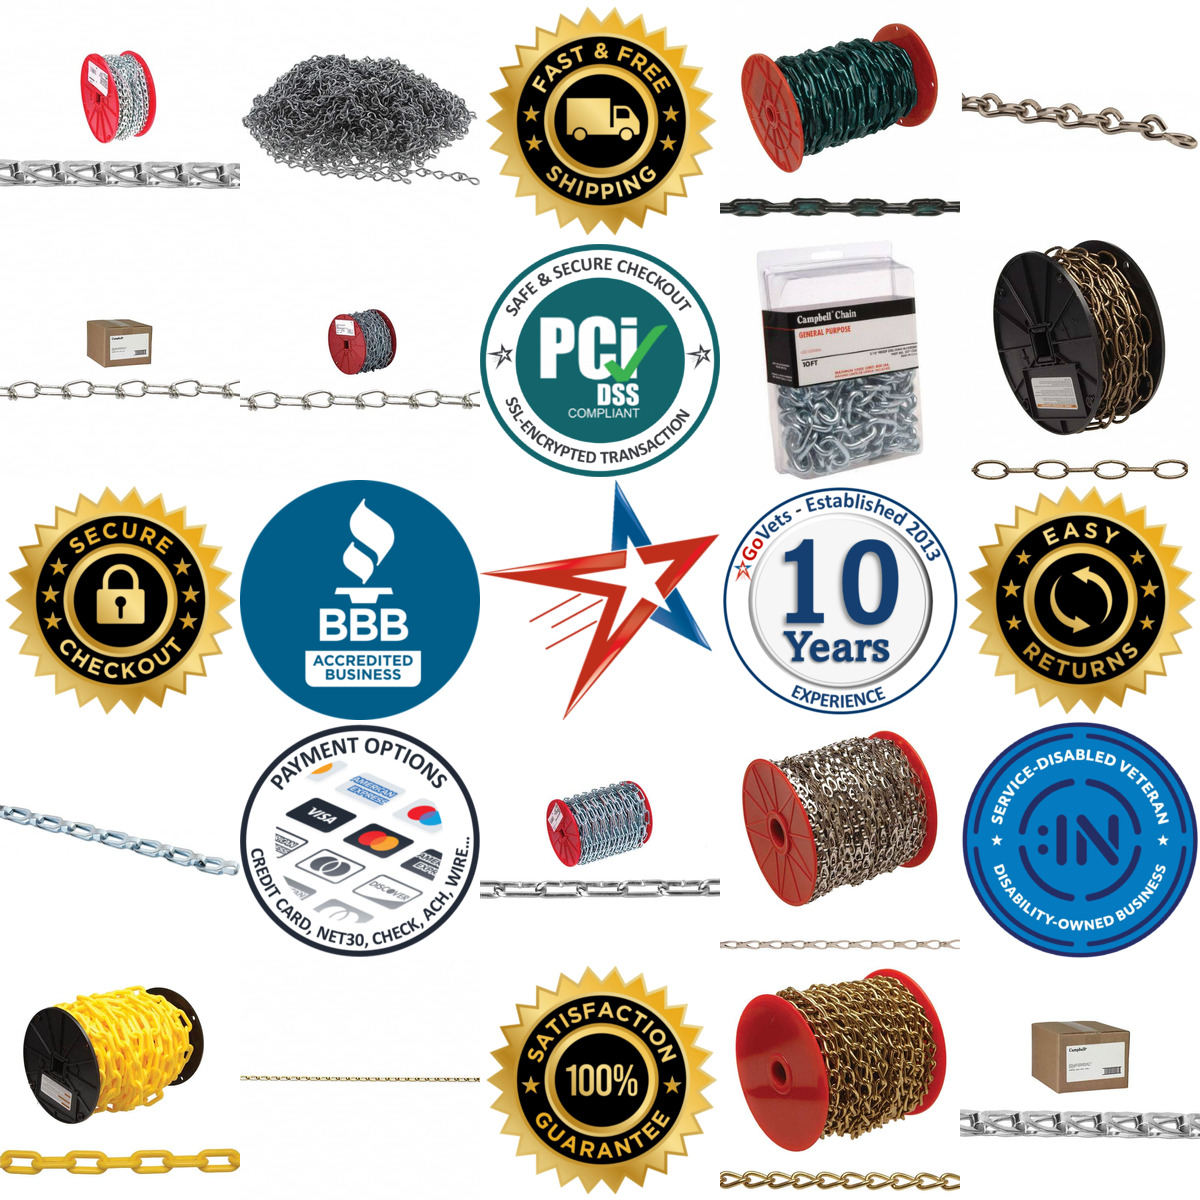 A selection of Weldless Chain products on GoVets